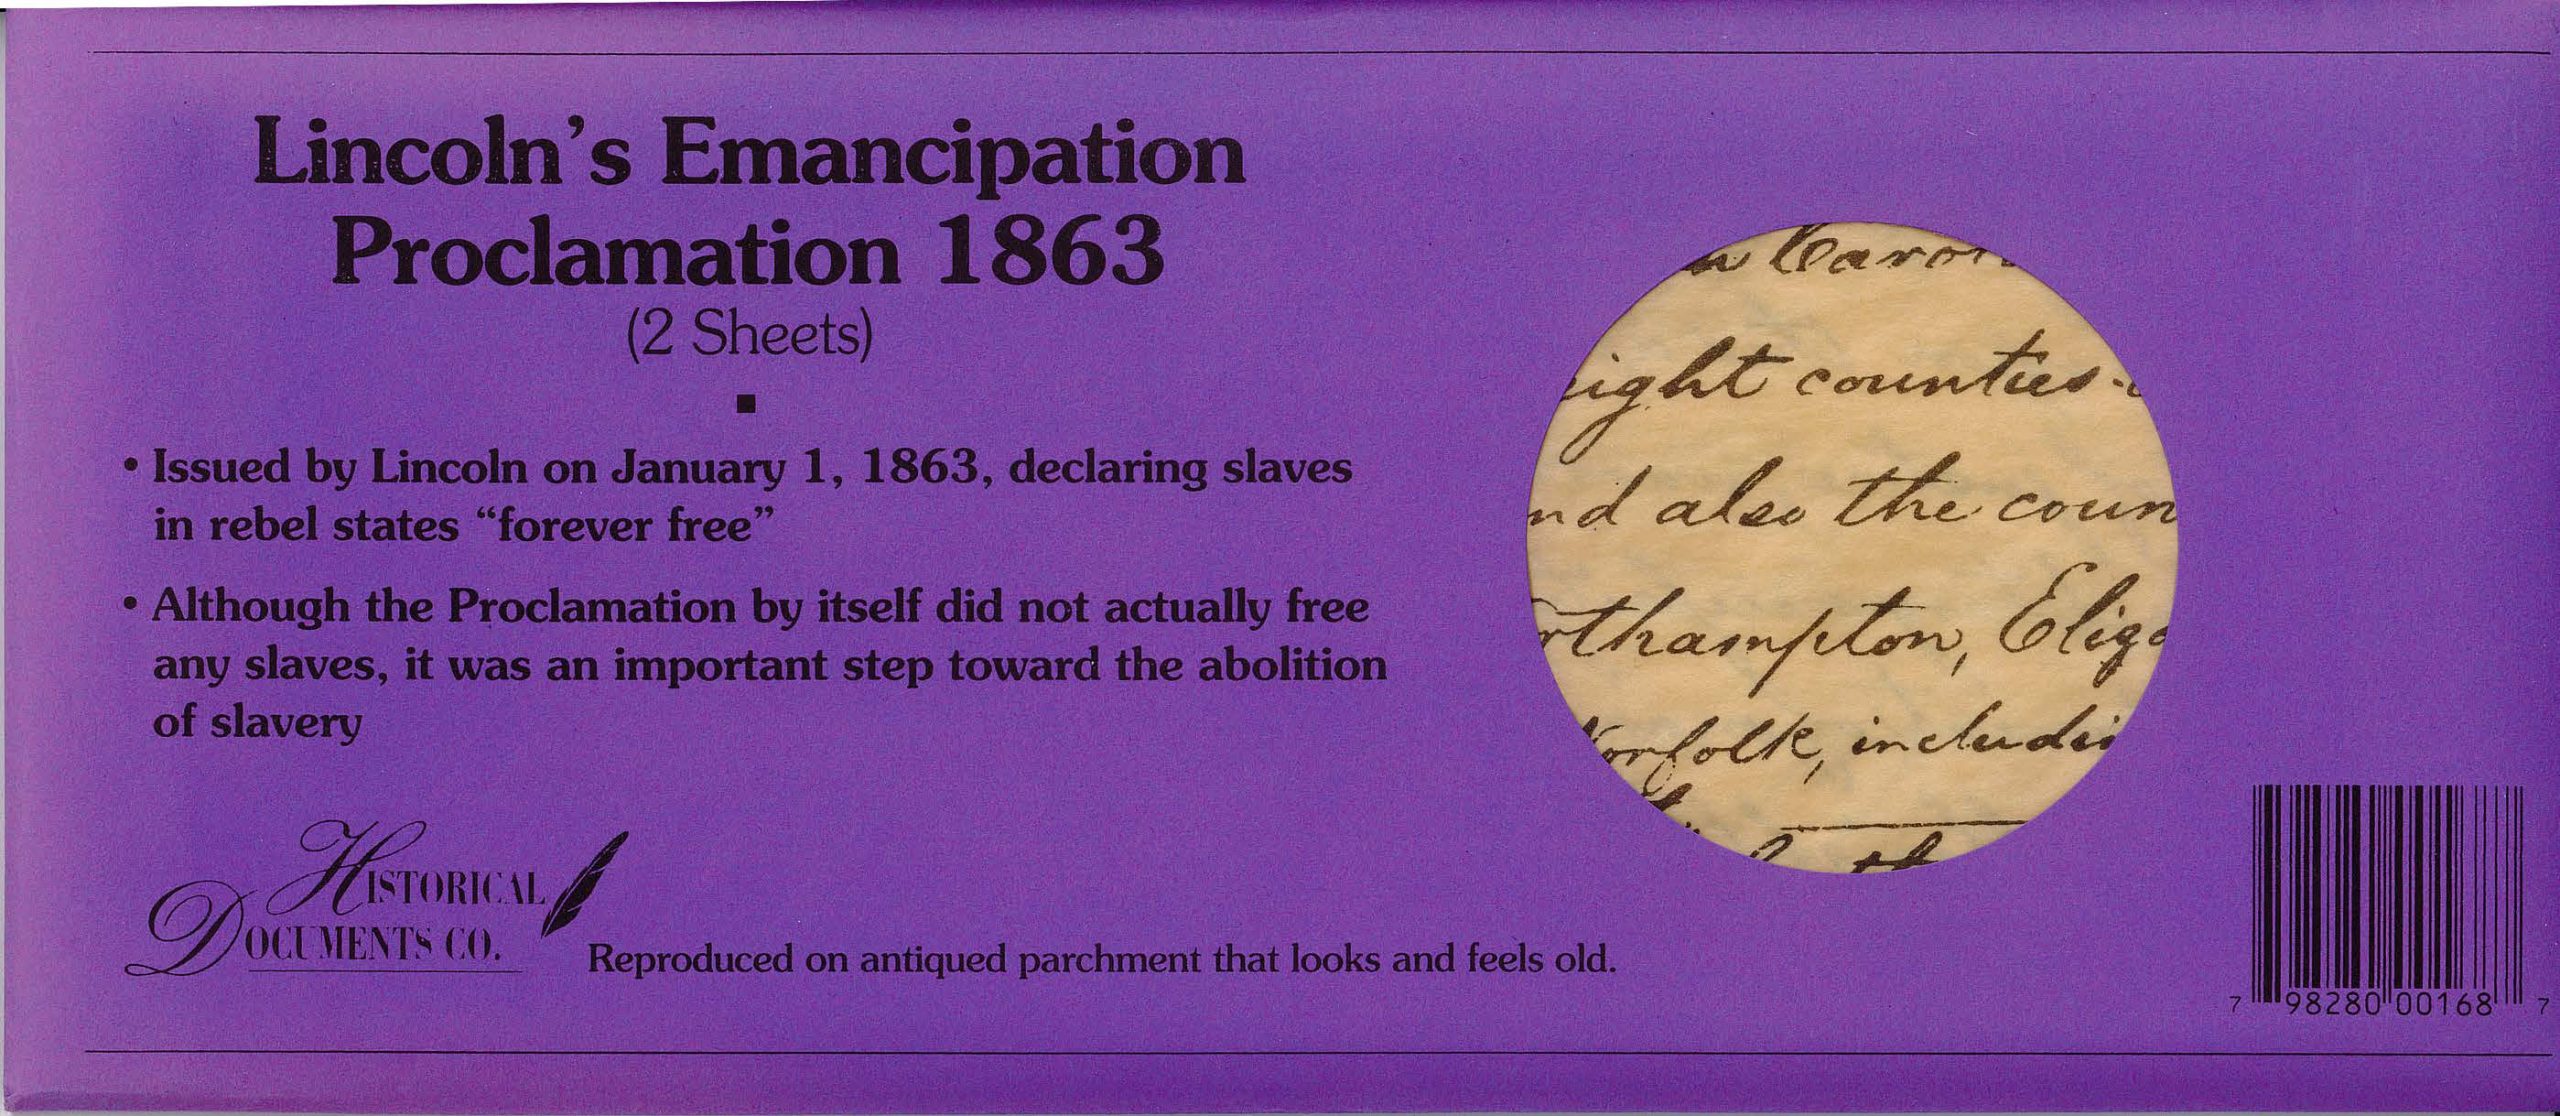 Documents- Lincoln’s Emancipation Proclamation 1863